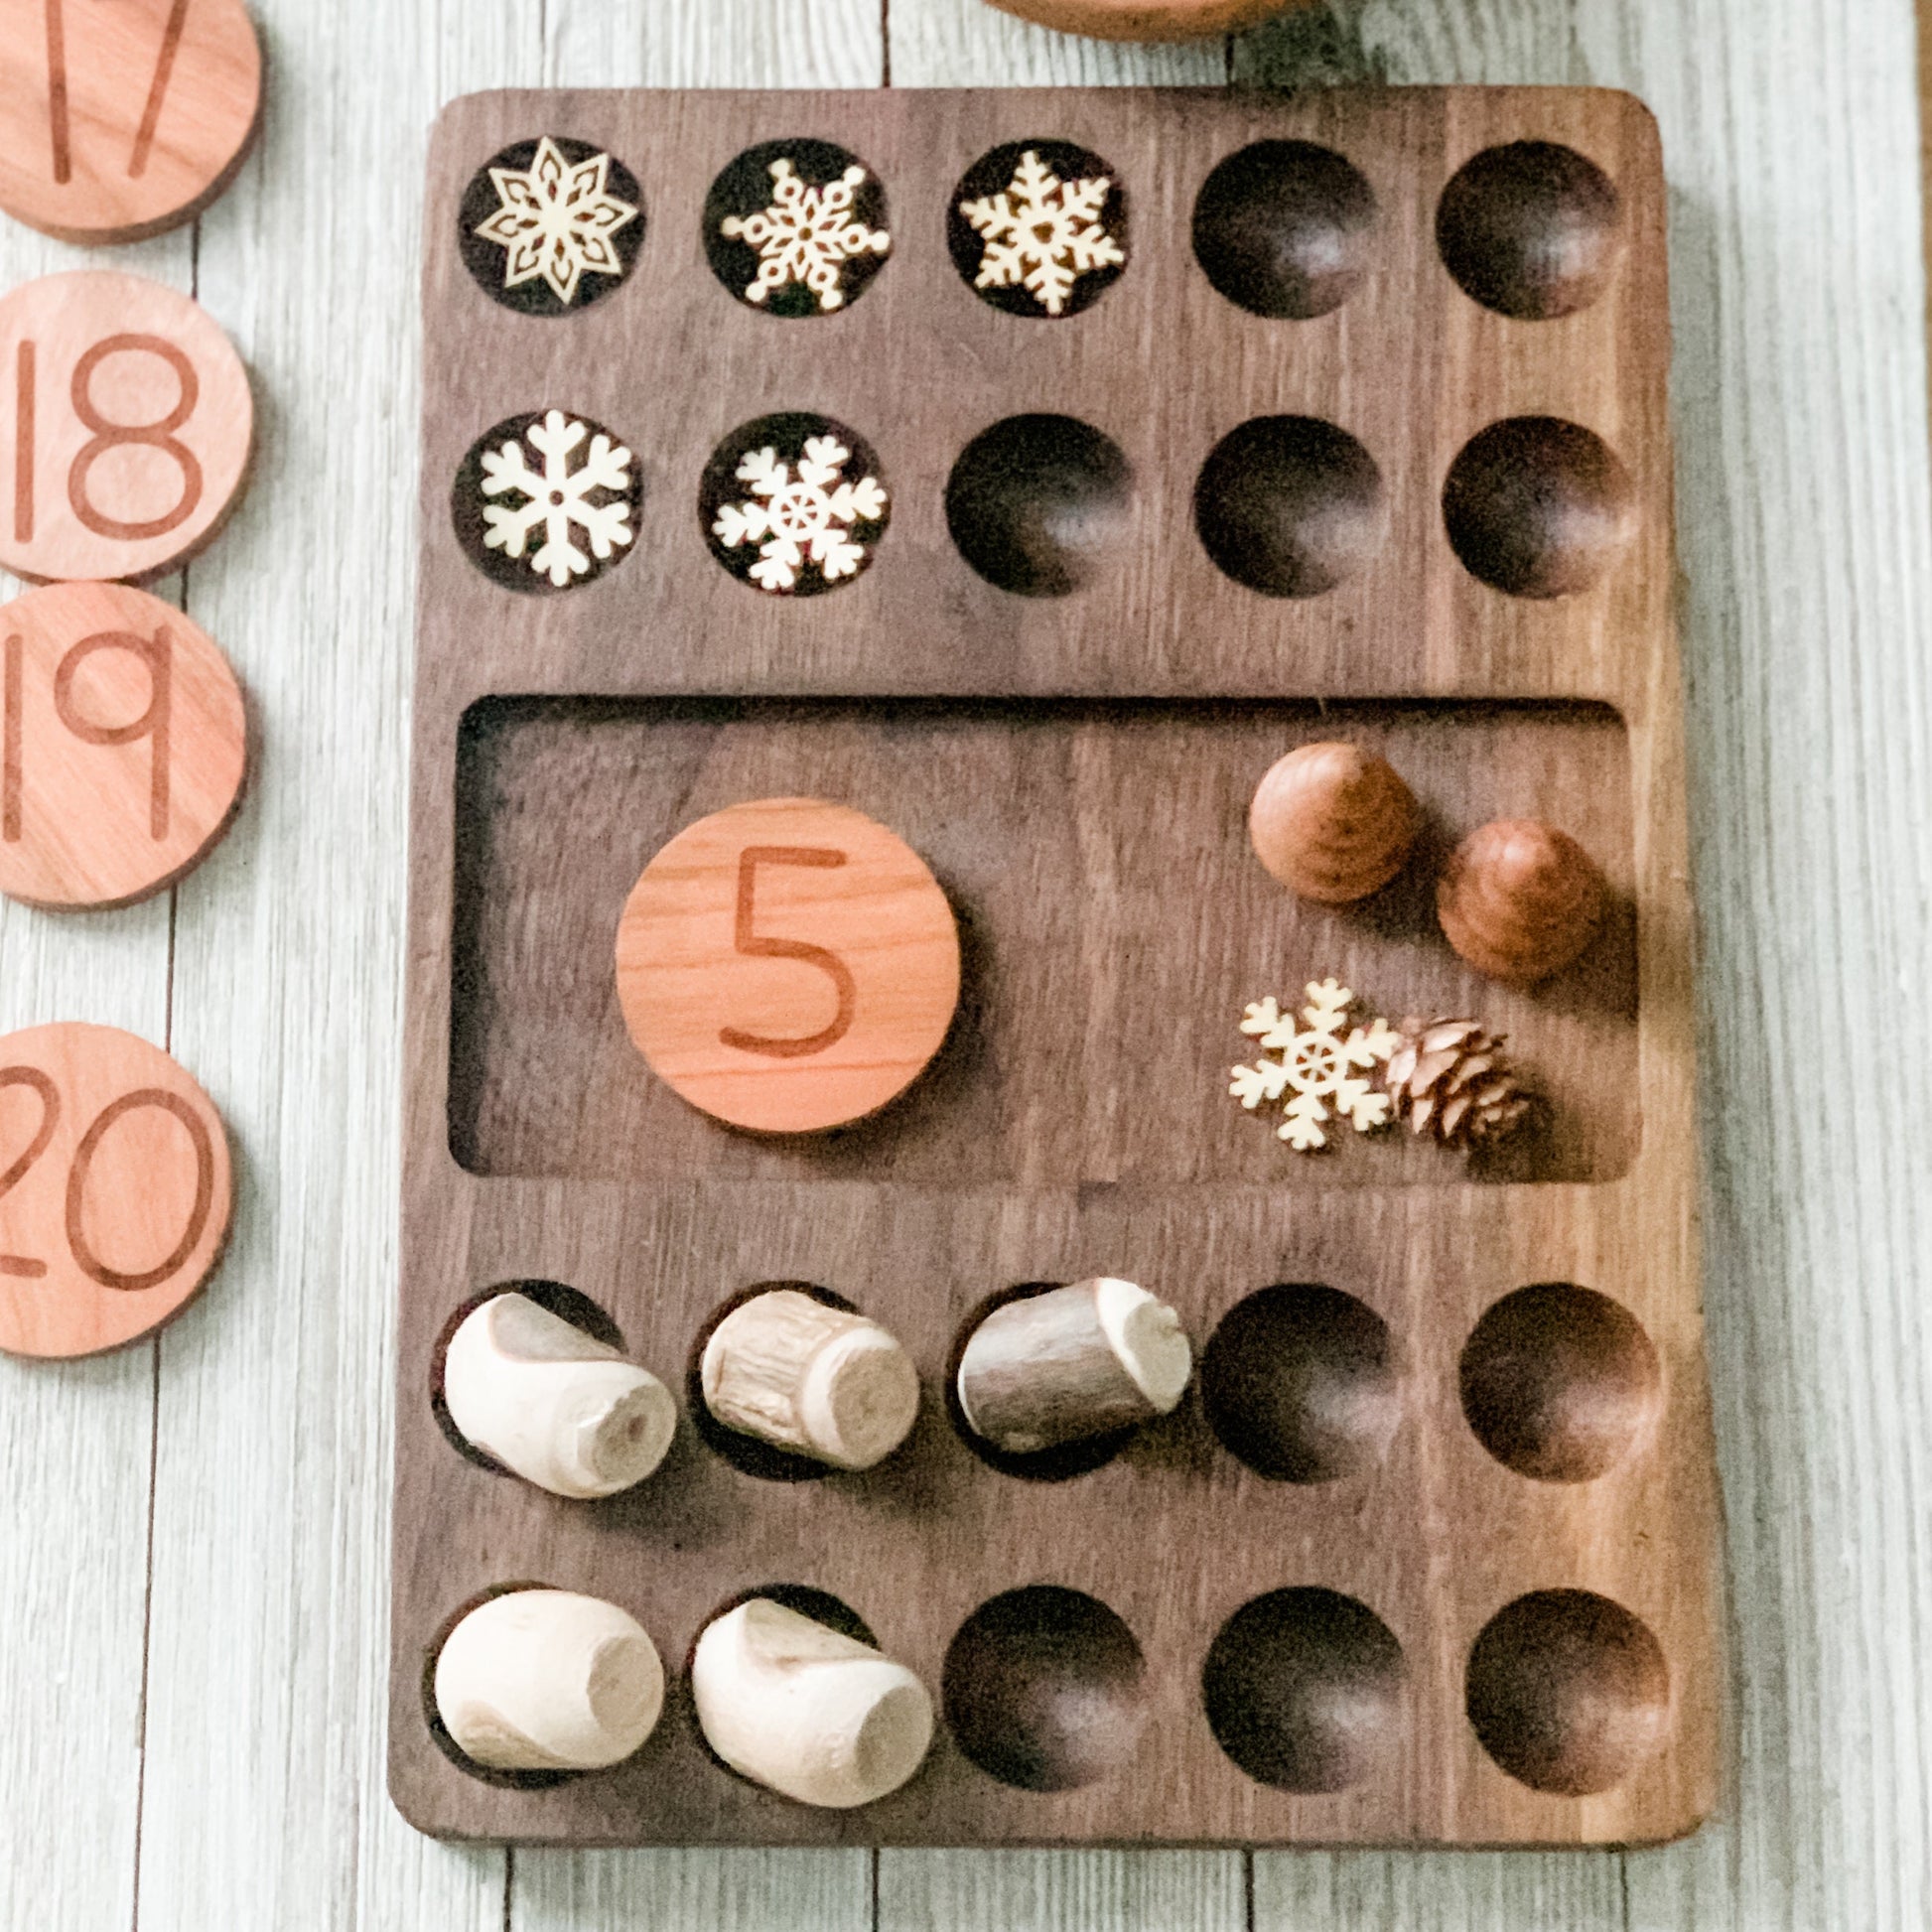 Wooden Numbers for Learning Games, Educational Tool (Rainbow Colors, 50  Pieces), PACK - Smith's Food and Drug